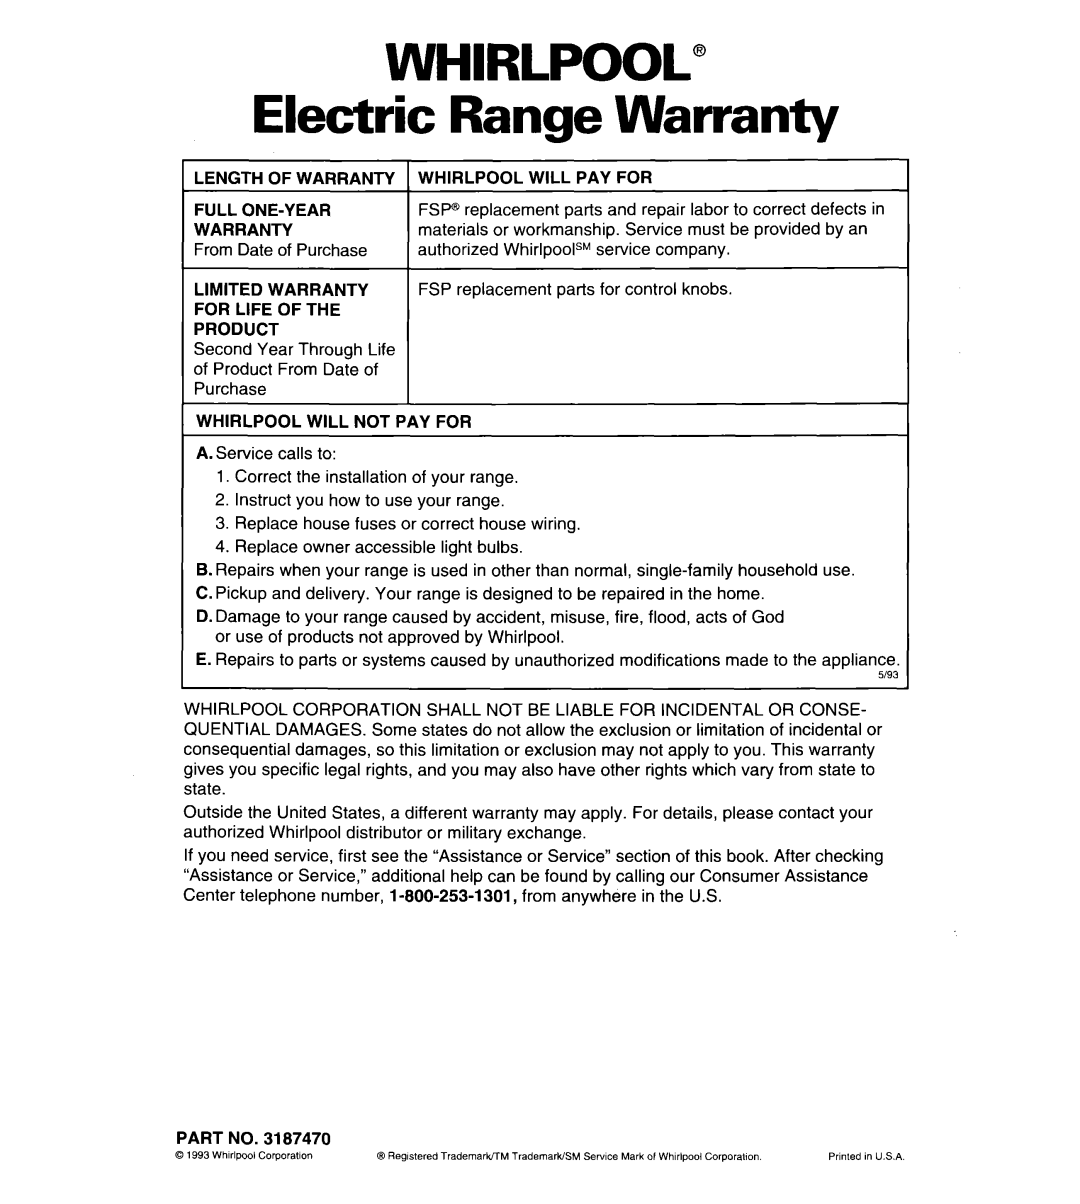 Whirlpool RF315PCY important safety instructions WHIRLPOOL” Electric Range Warranty 